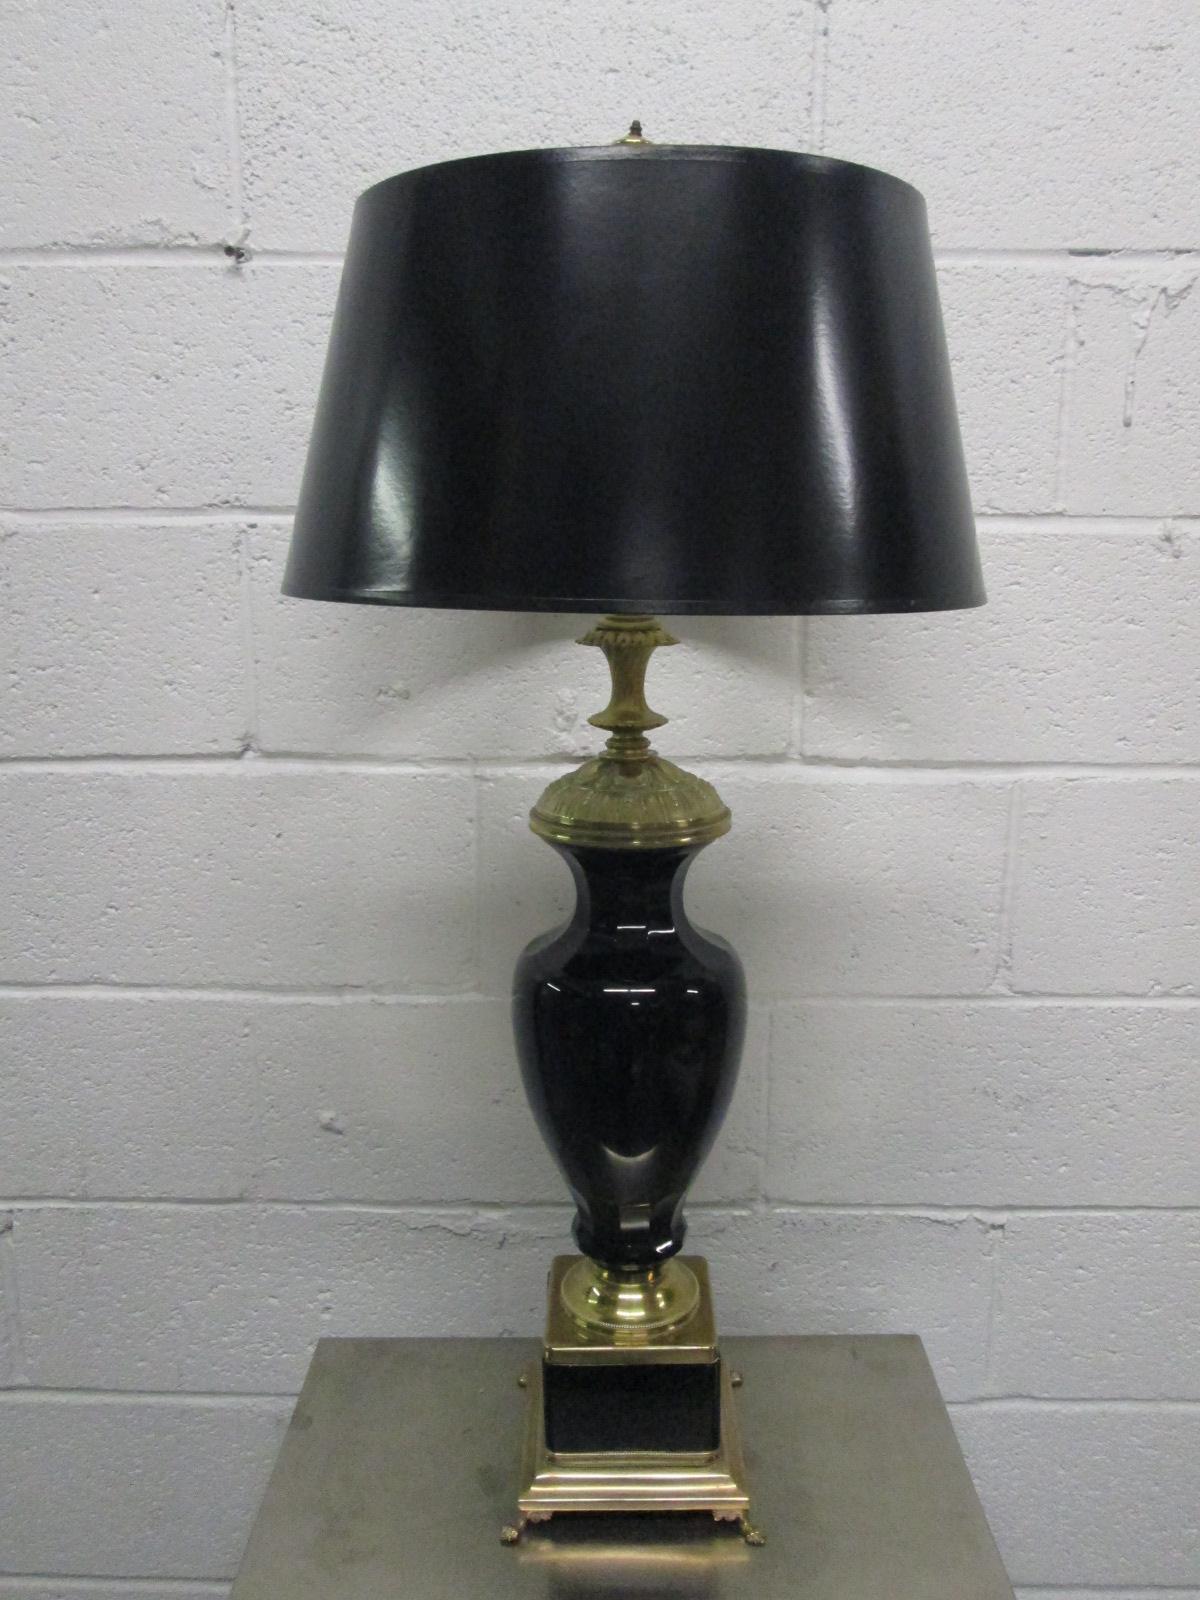 Pair of black opaline and brass lamps. Has claw feet to the base. 
Measures: 35.25